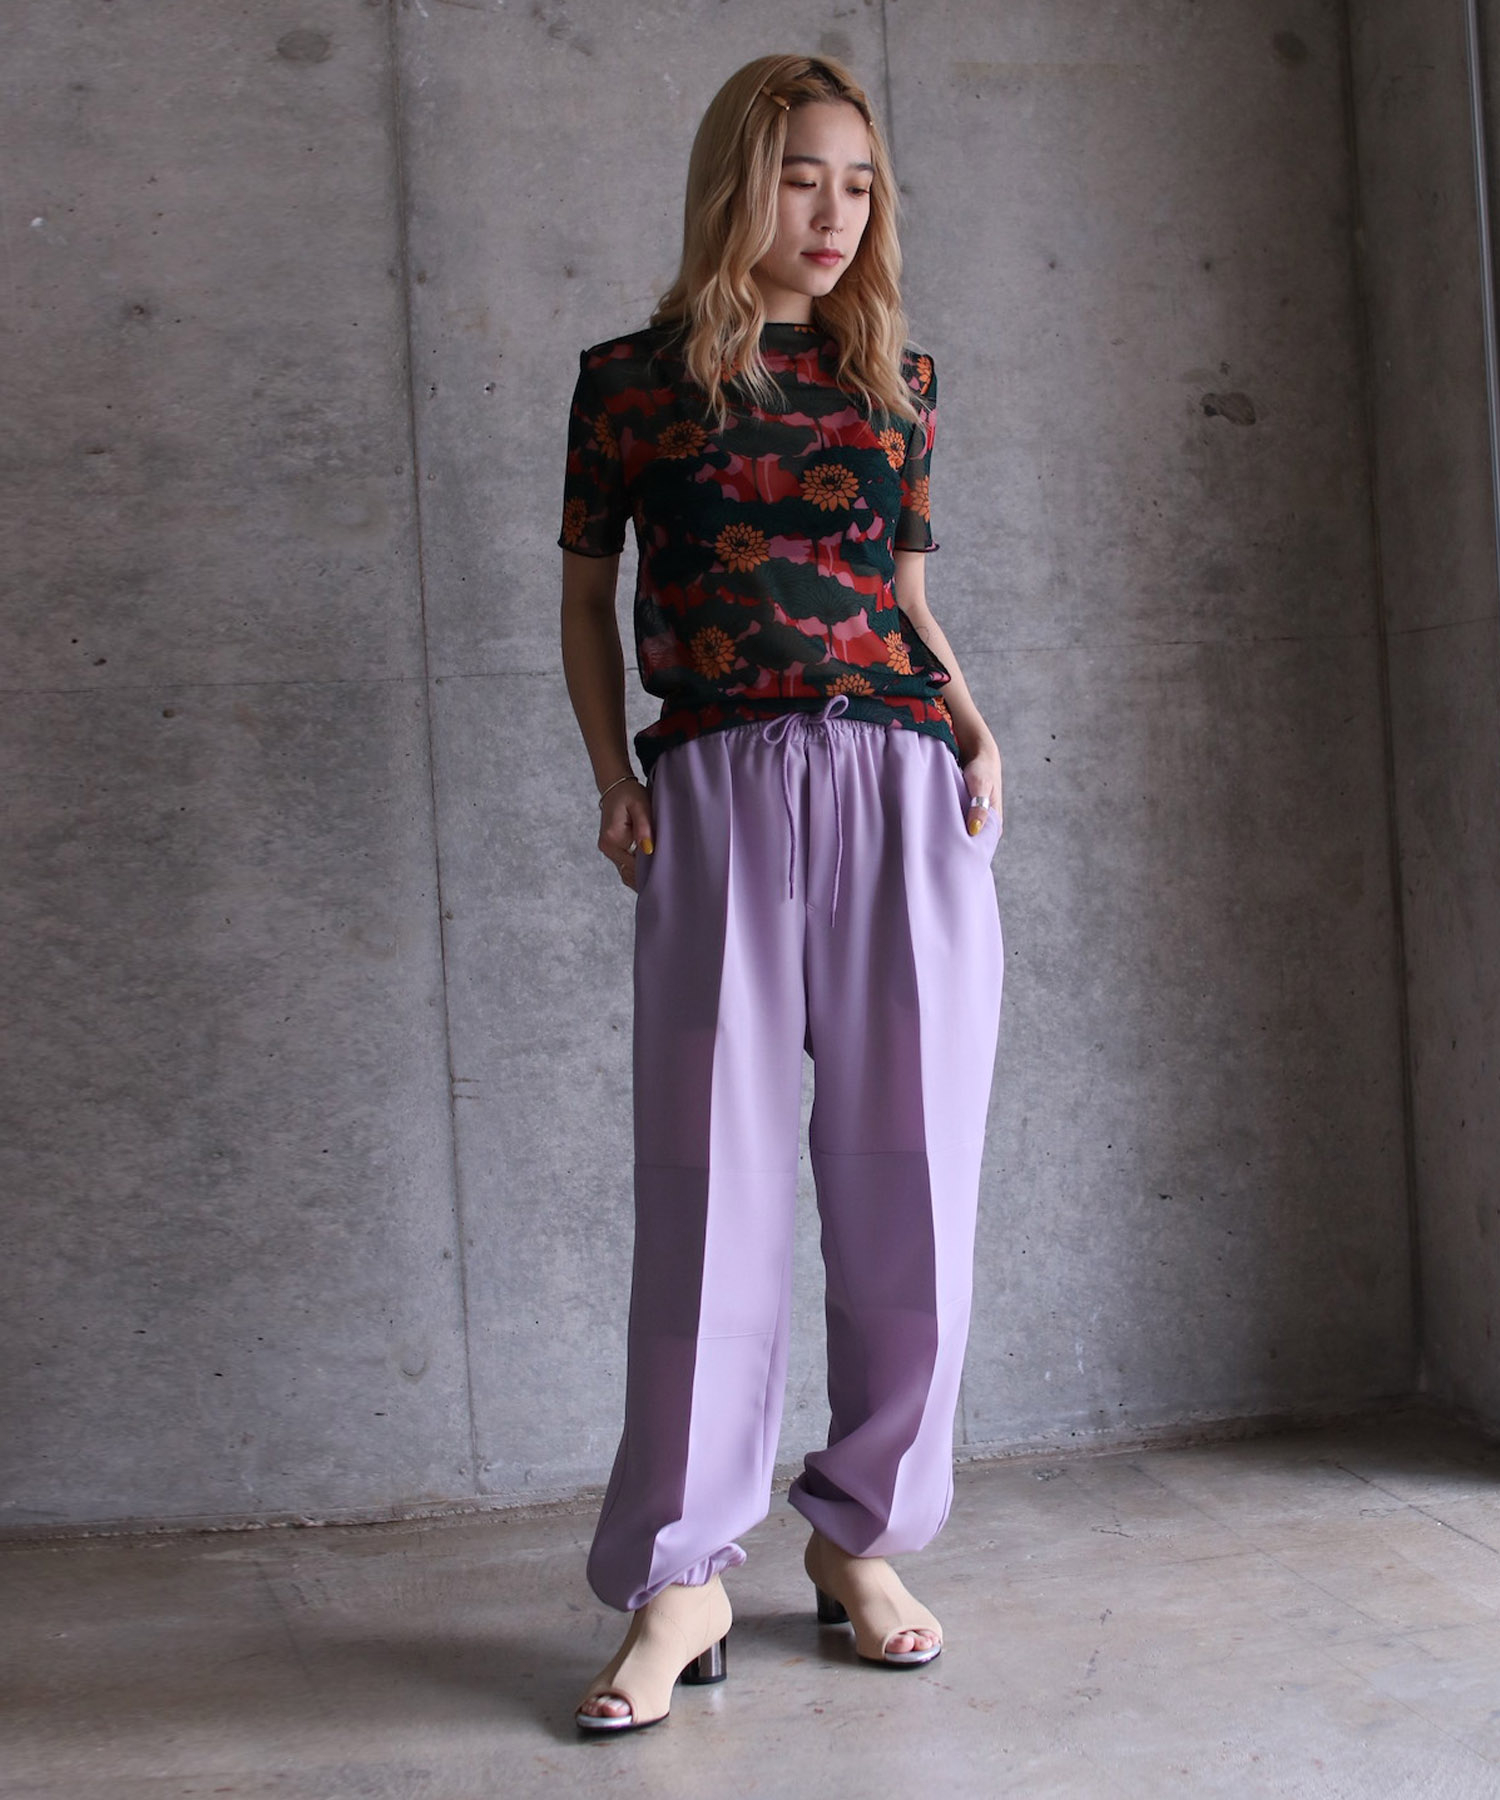 FLORAL STRECH TULL H/S TOP